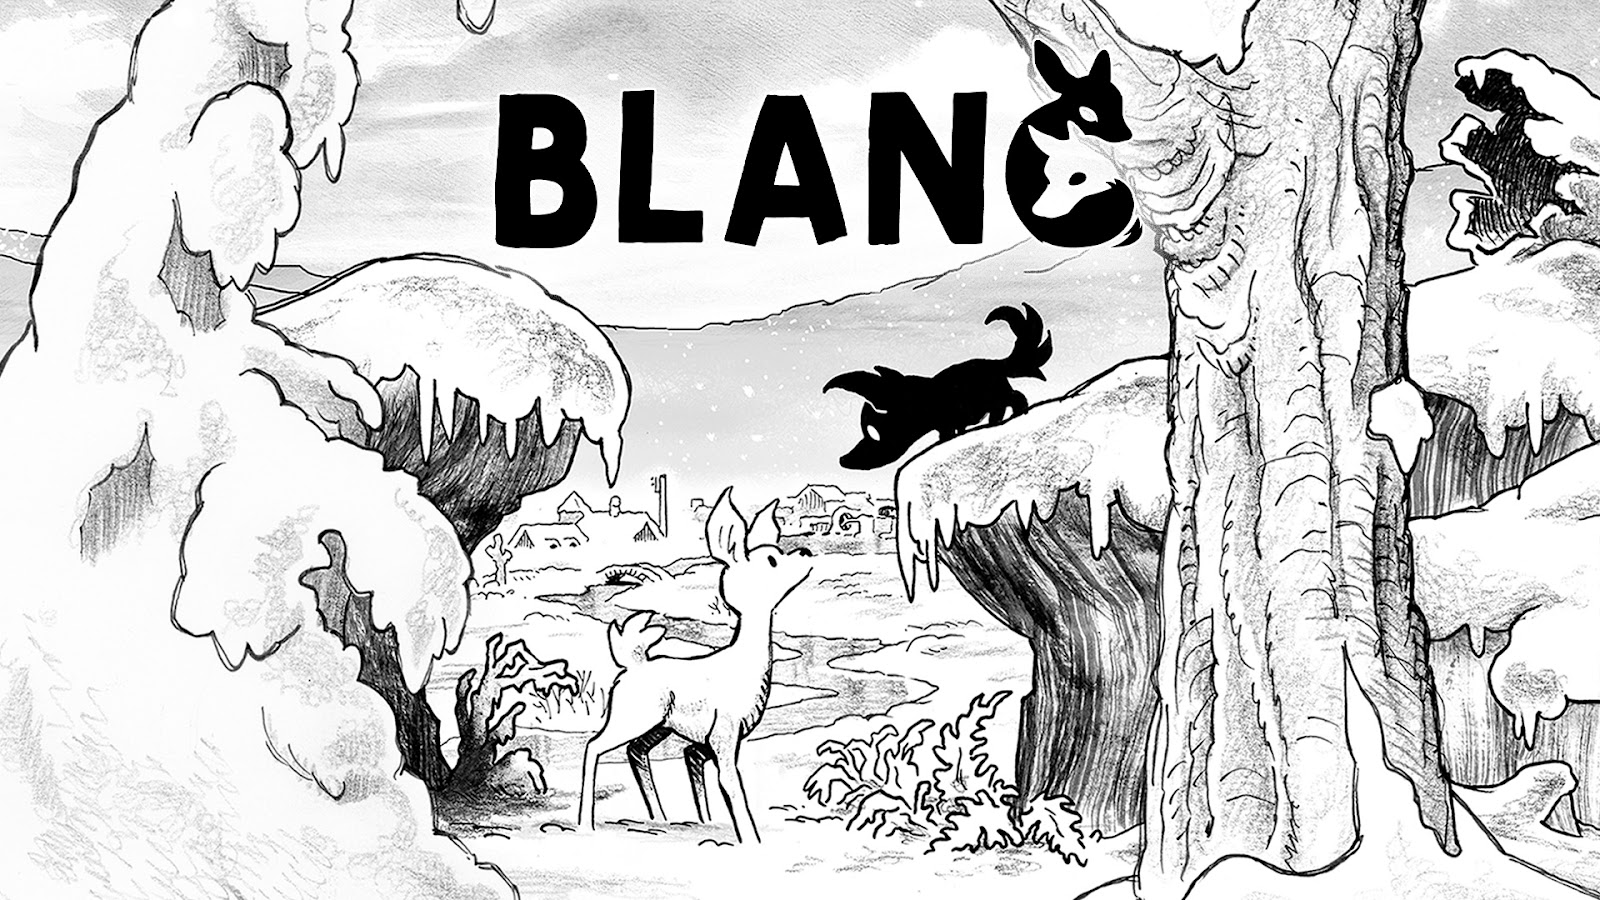 Blanc is a family friendly co-op adventure starring a fawn and a wolf cub